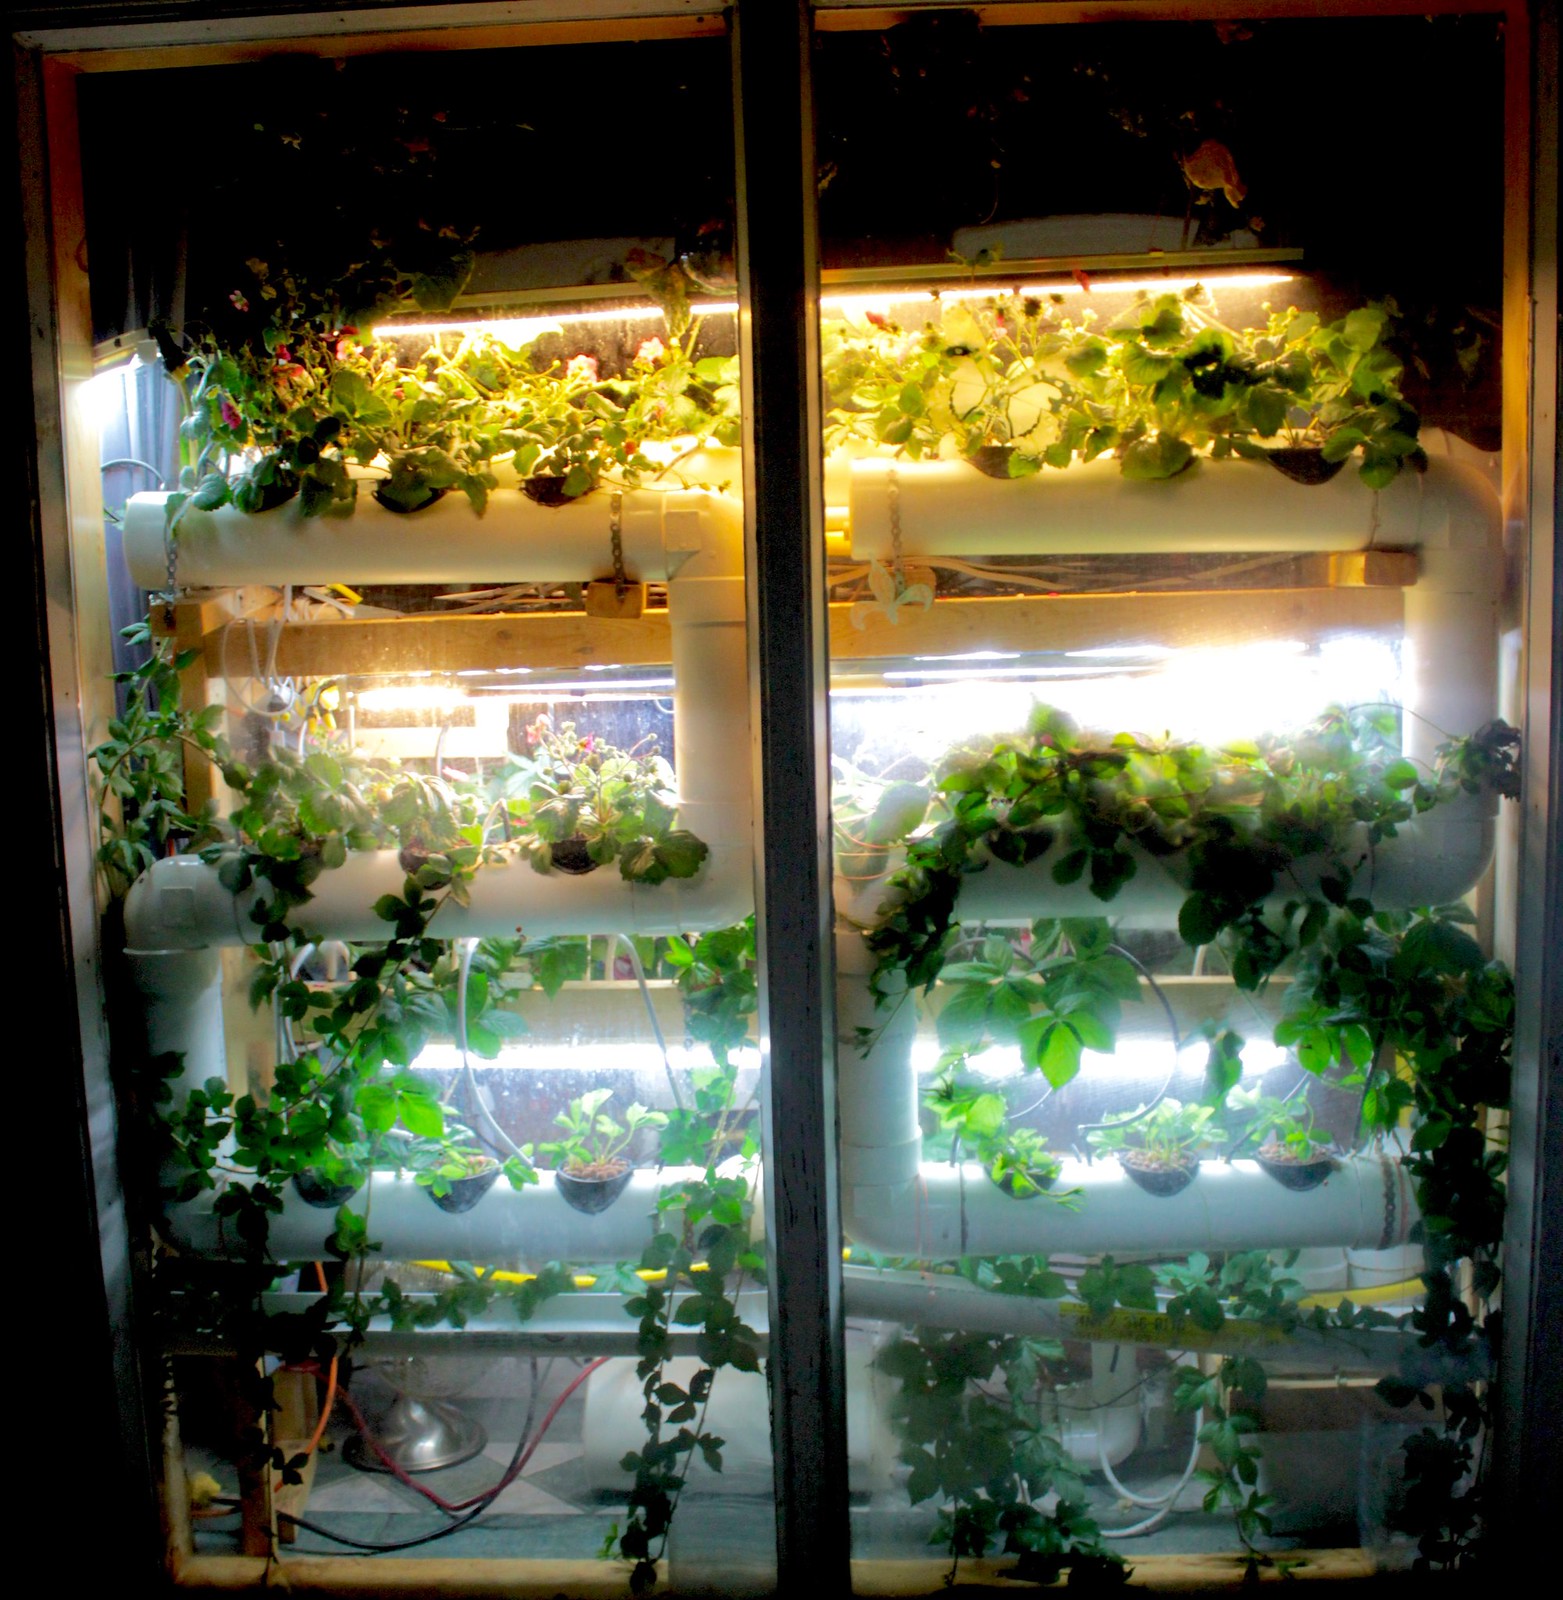 Vertical aeroponic garden from outside